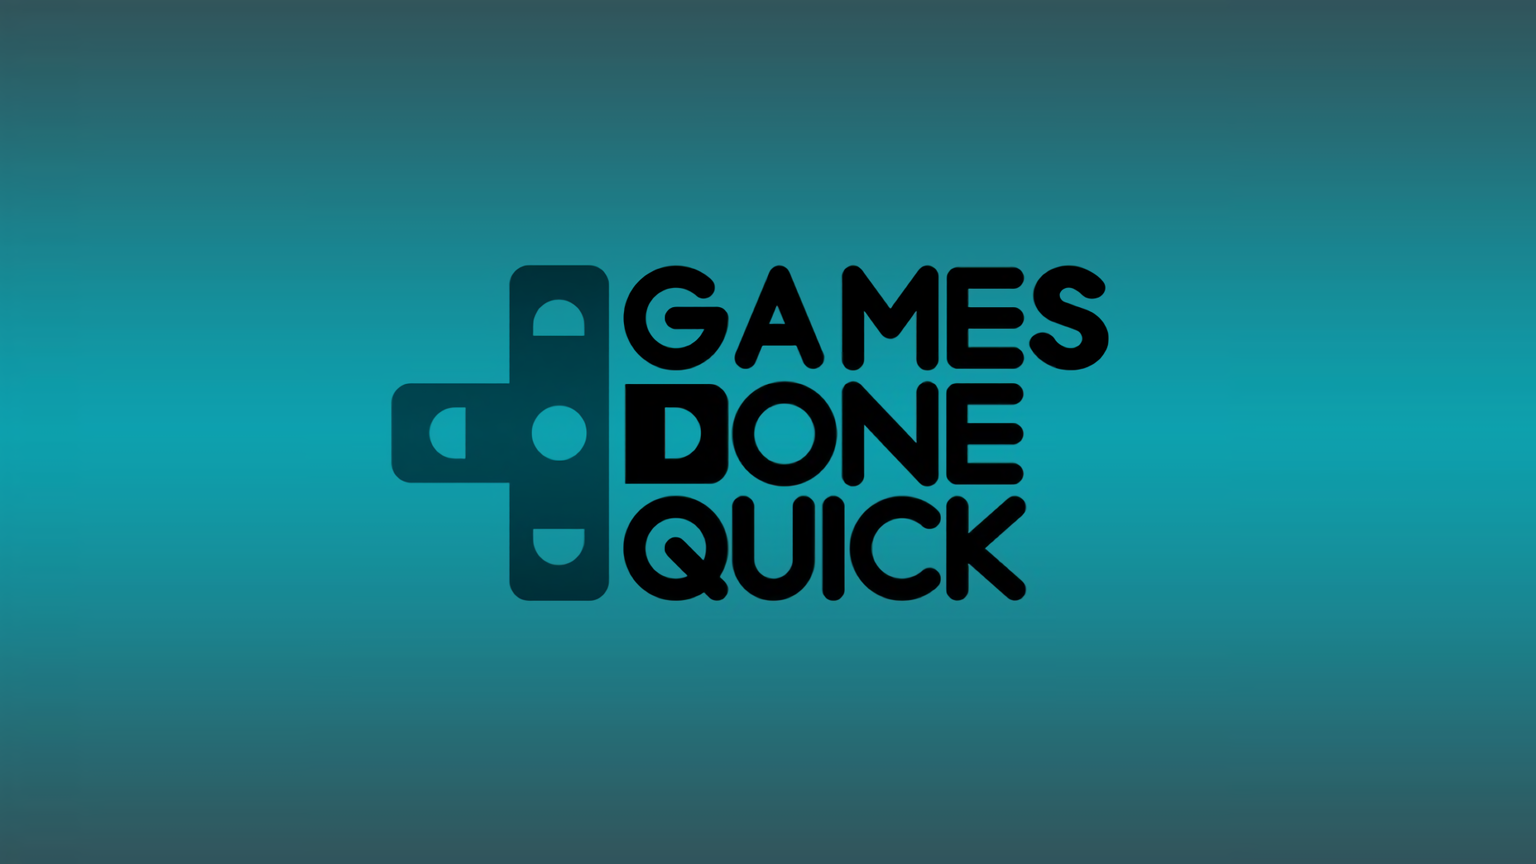 Awesome Games Done Quick speedrunning marathon for charity starts this weekend